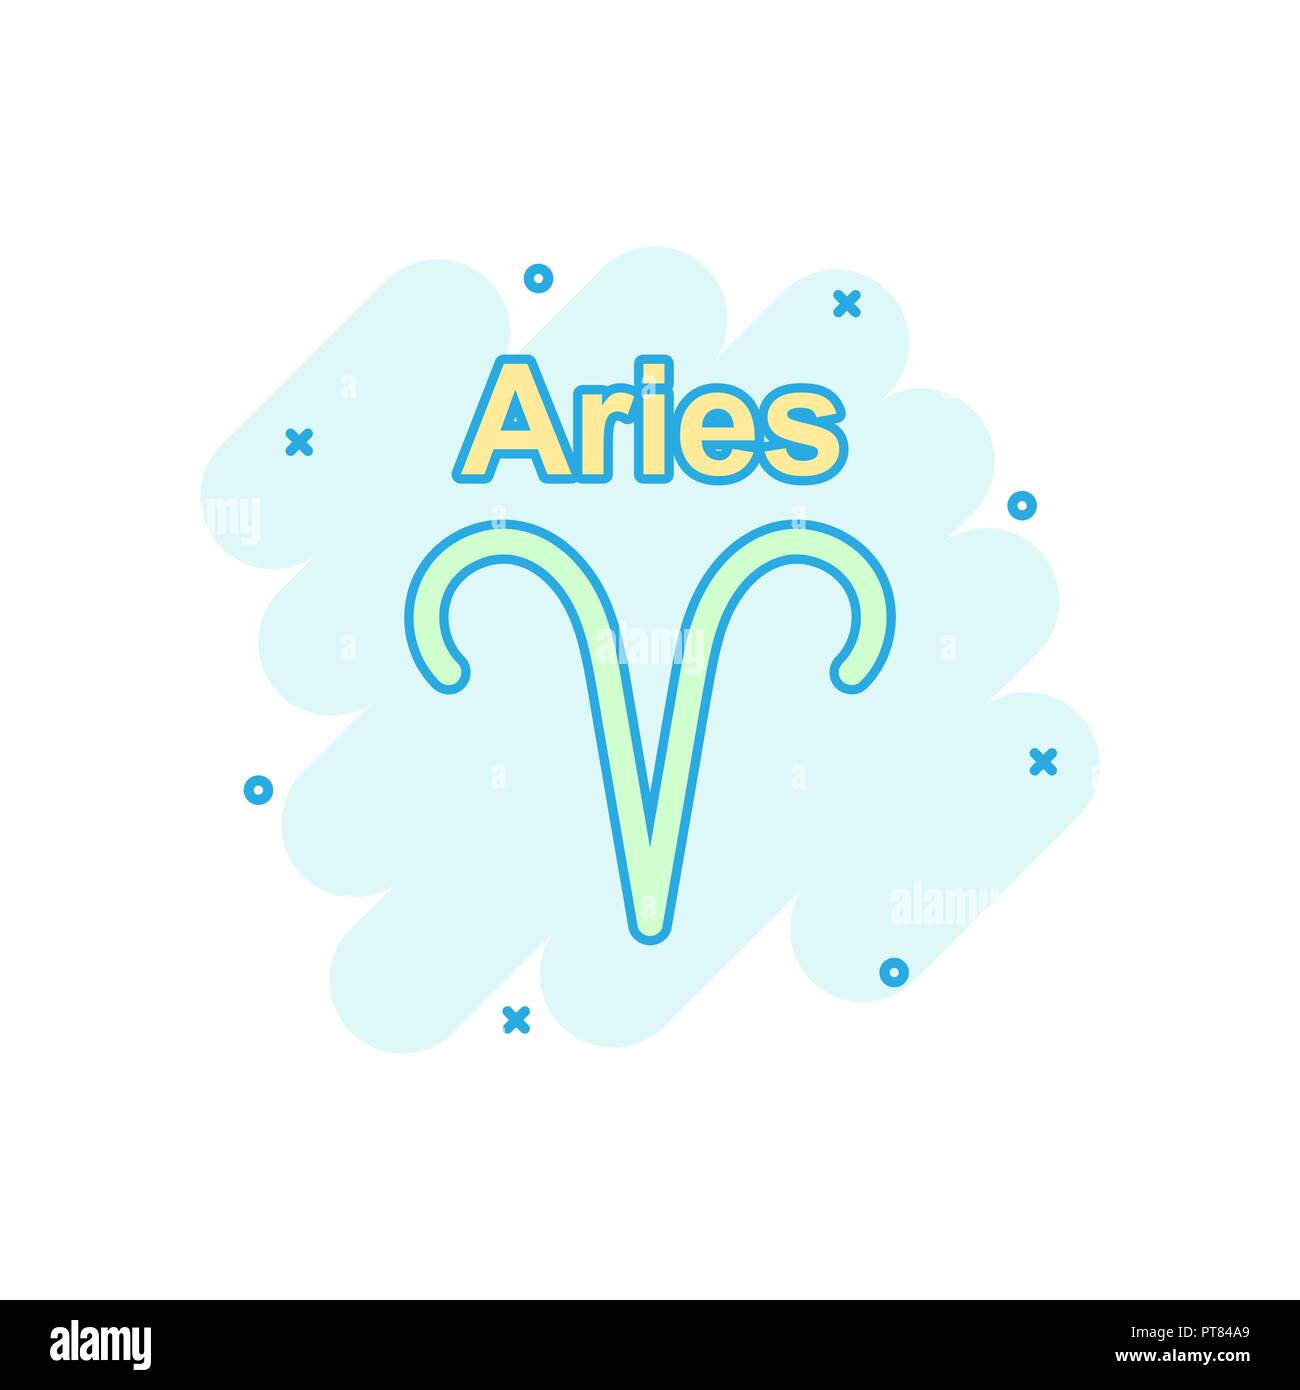 aries astrological influence today